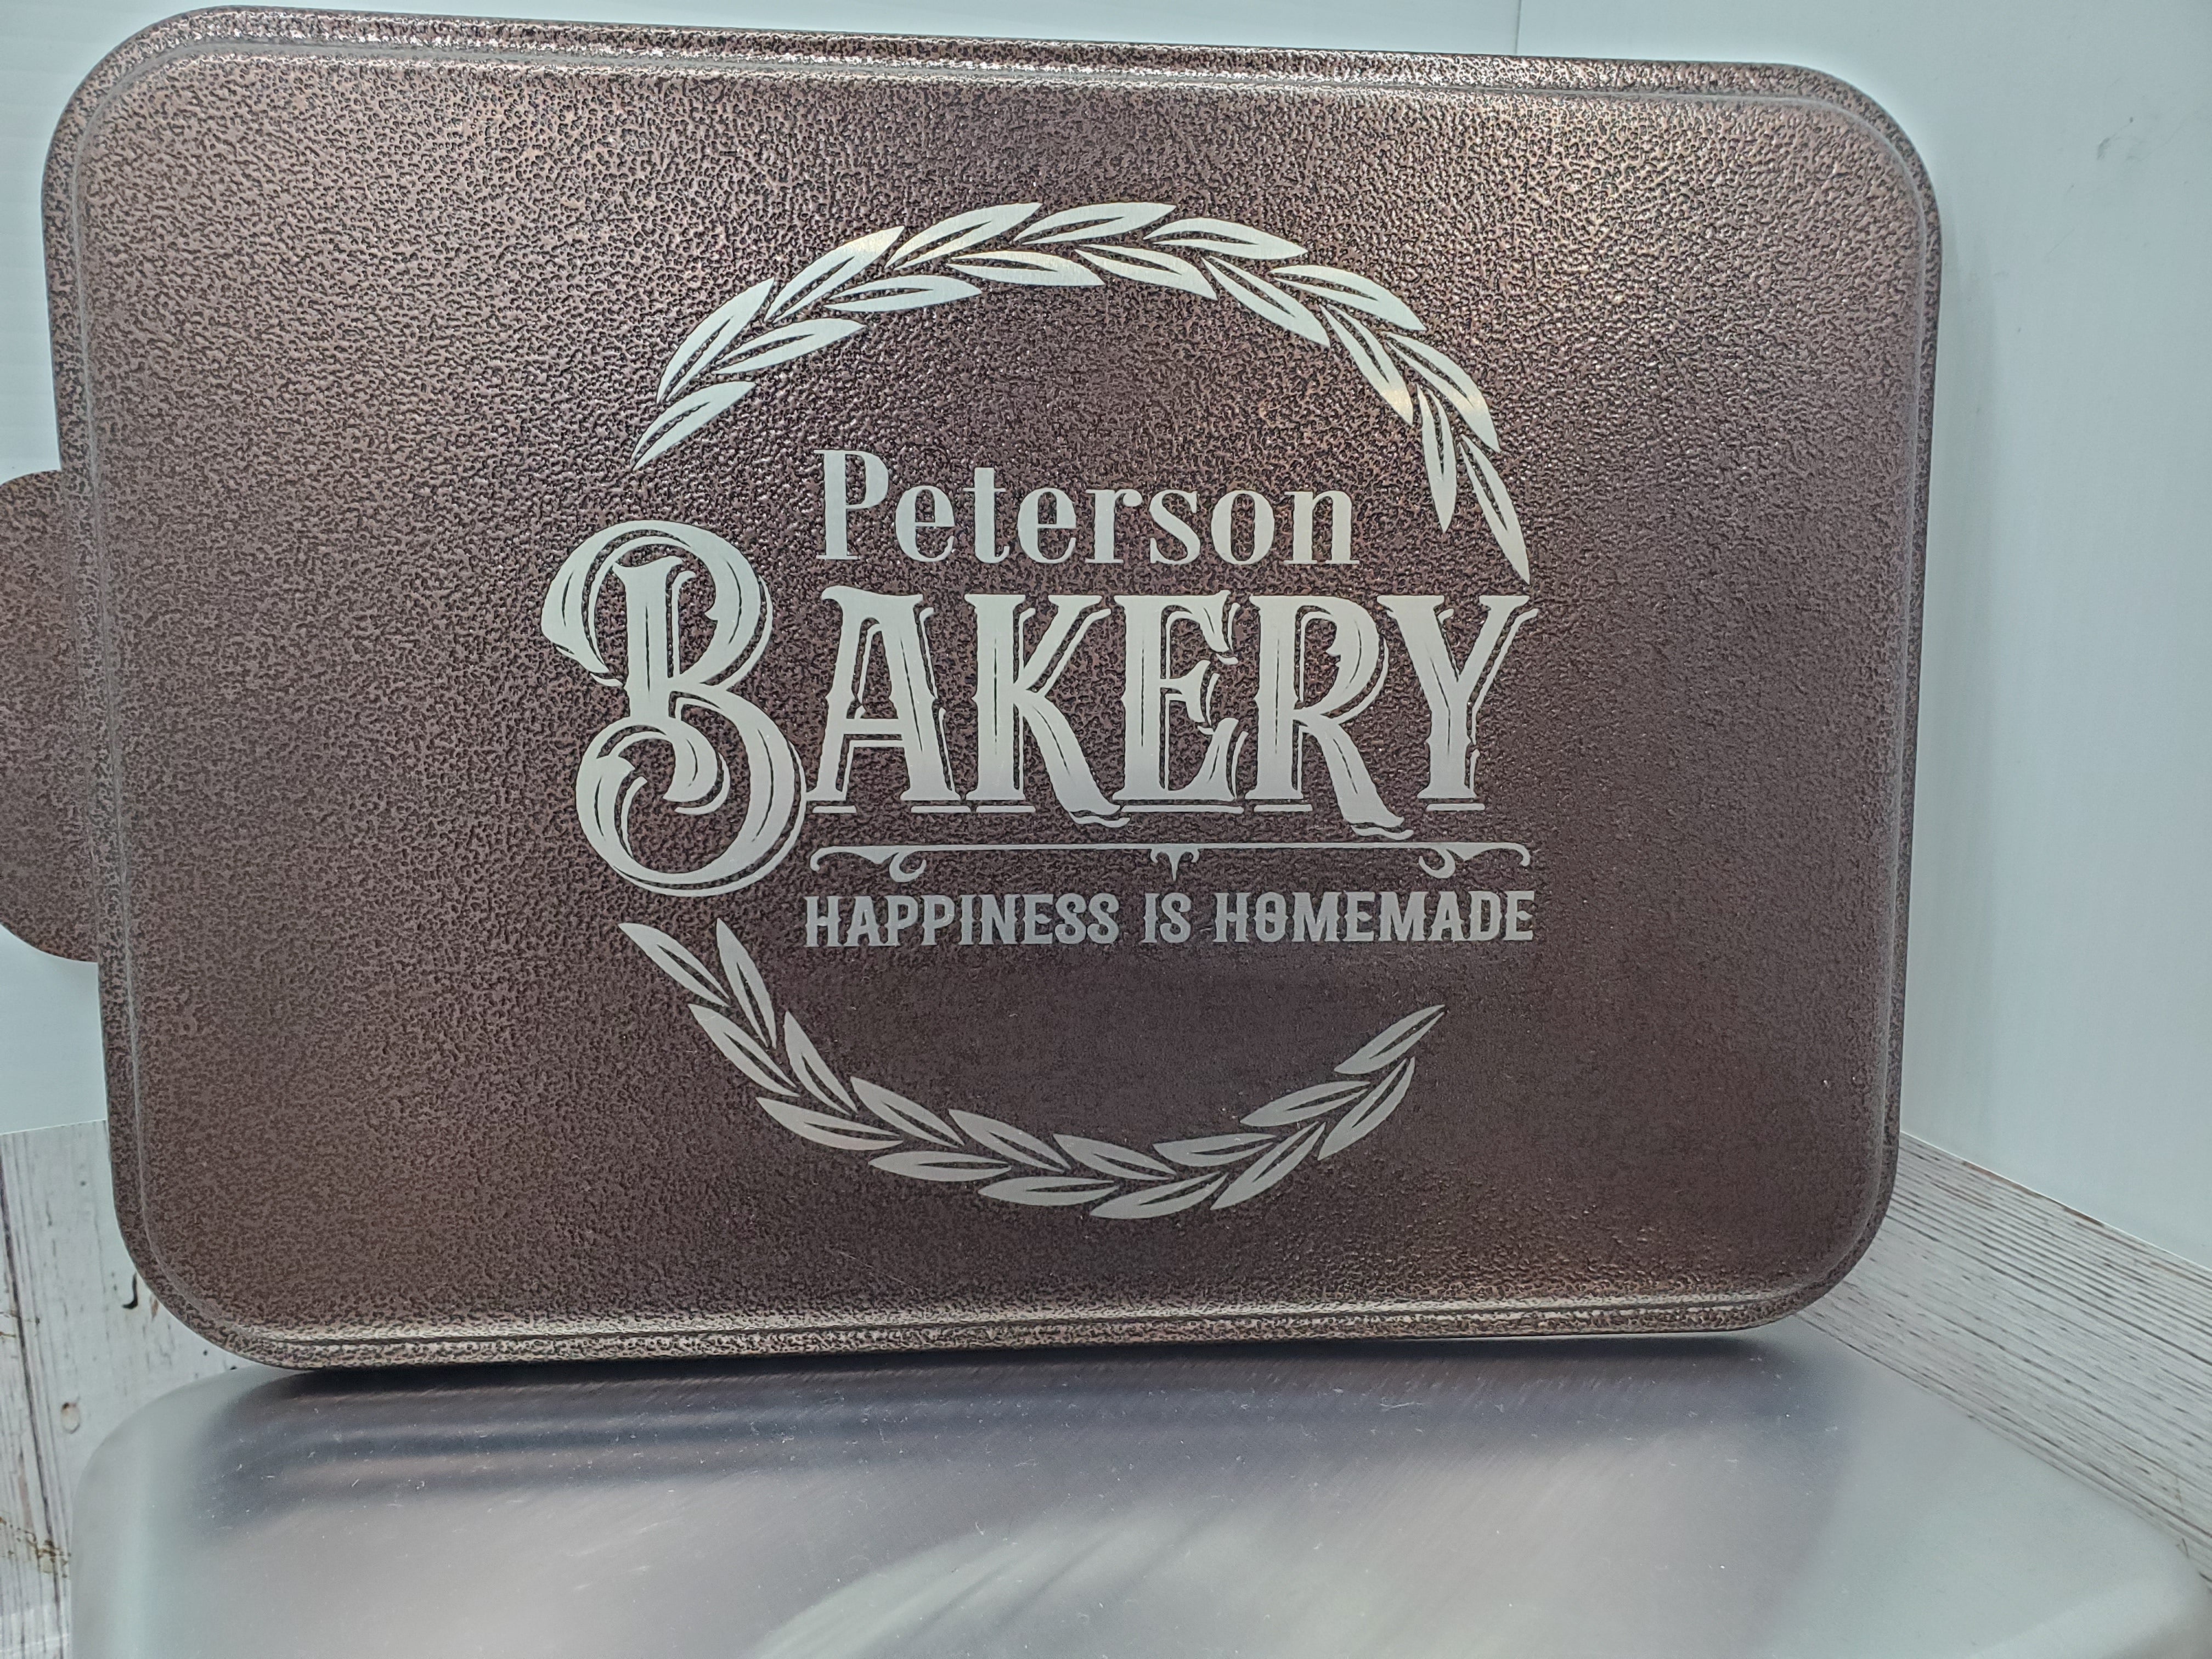 Aluminum Cake Pan With Custom Engraved Lid 9x13 5 Colors to Choose